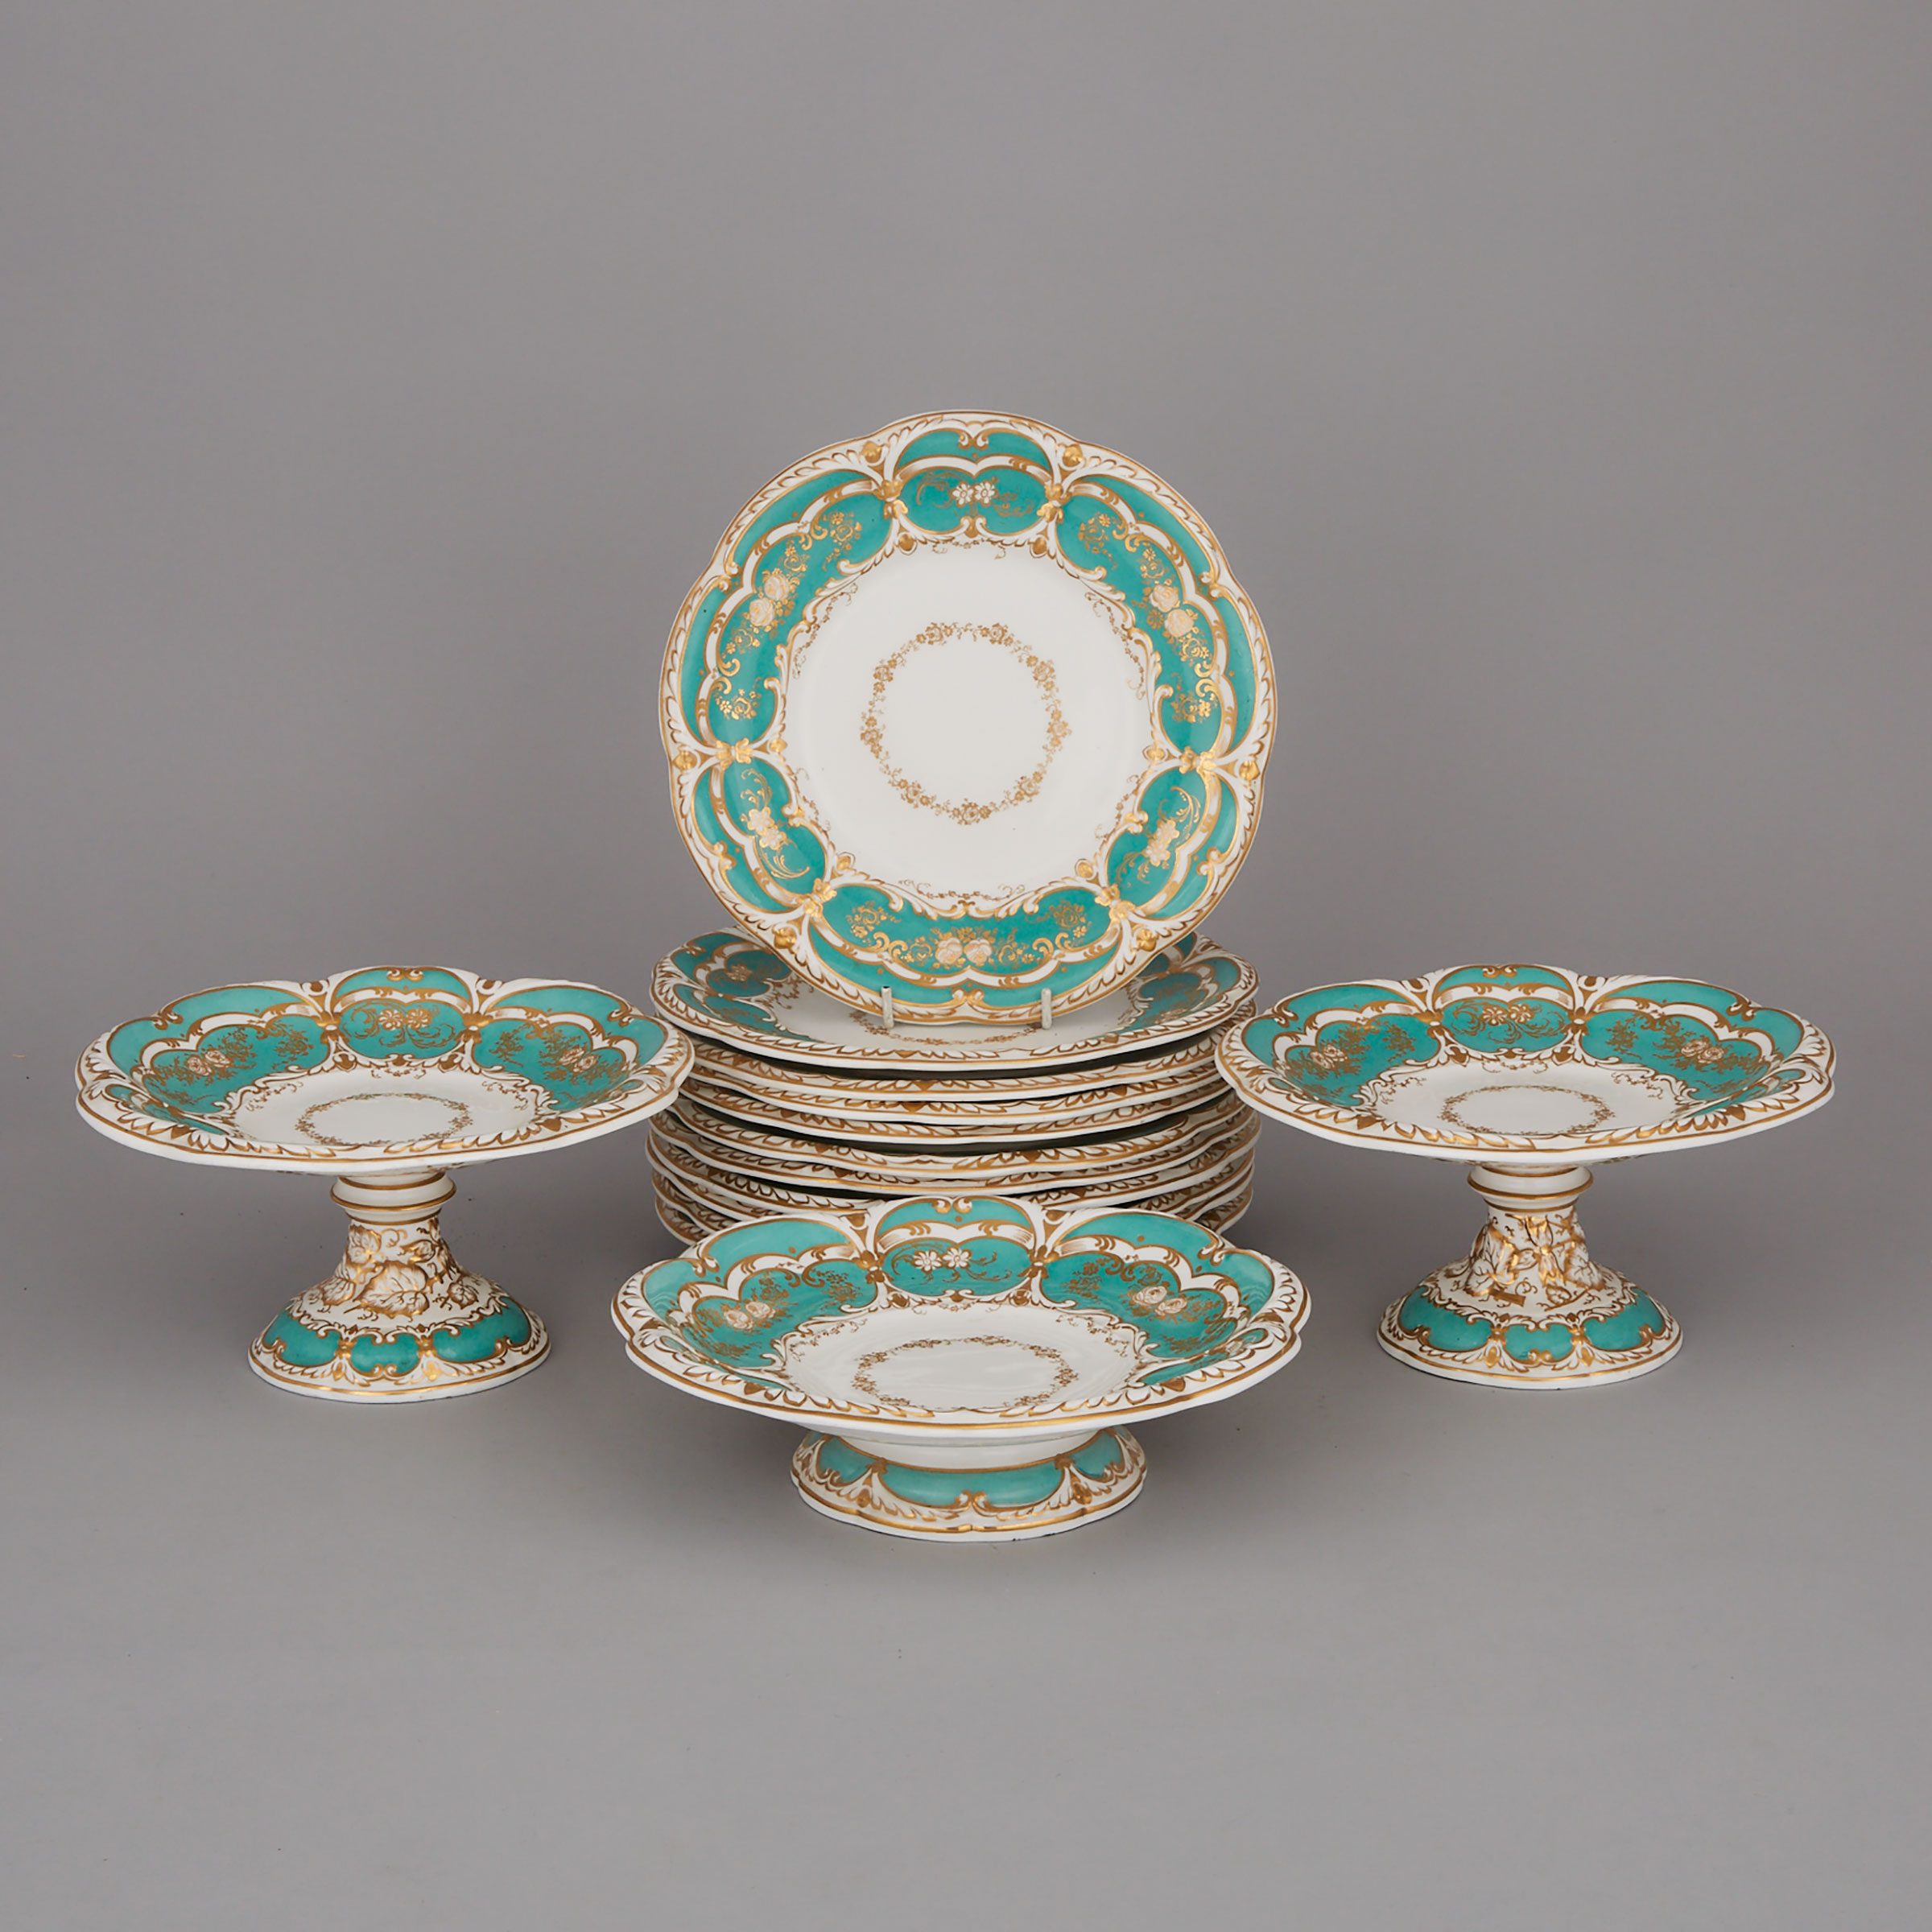 Davenport Turquoise Ground and Gilt Decorated Dessert Service, mid-19th century